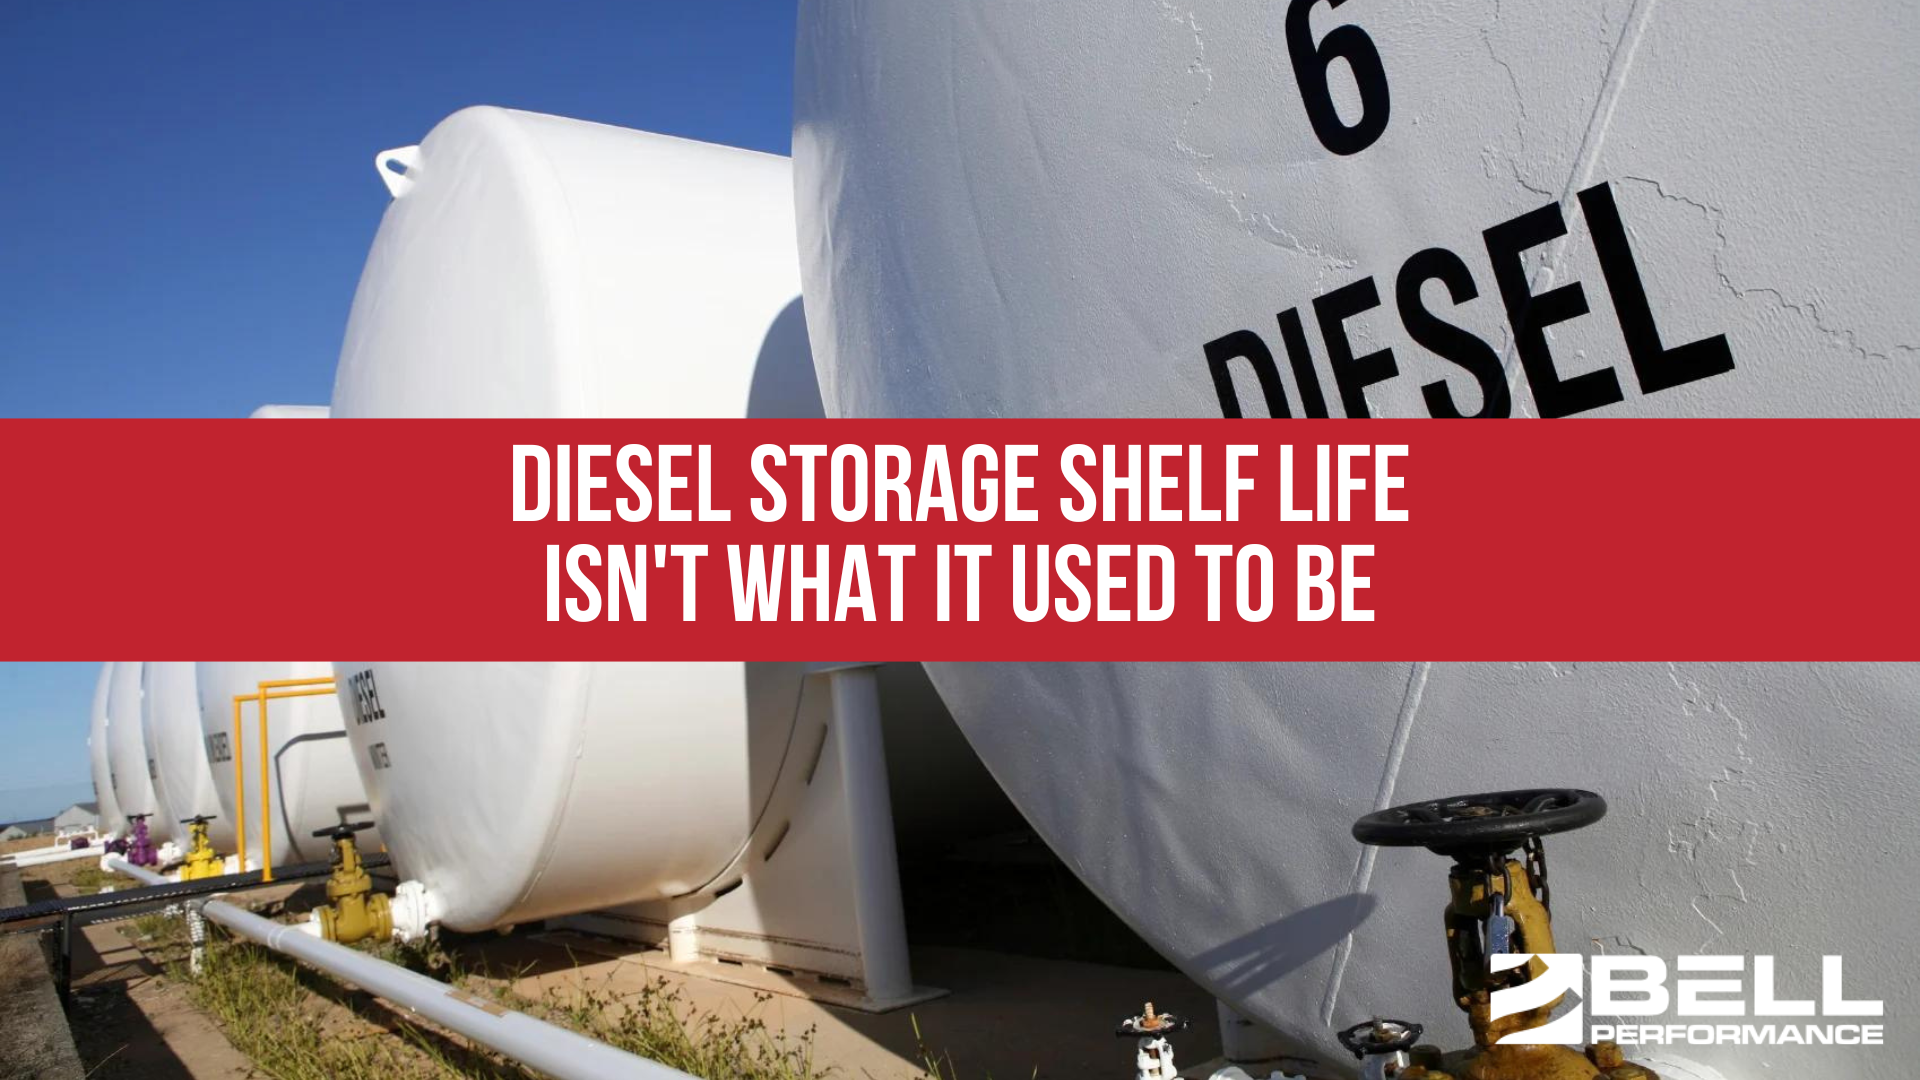 Diesel Storage Shelf Life Isn't What It Used To Be